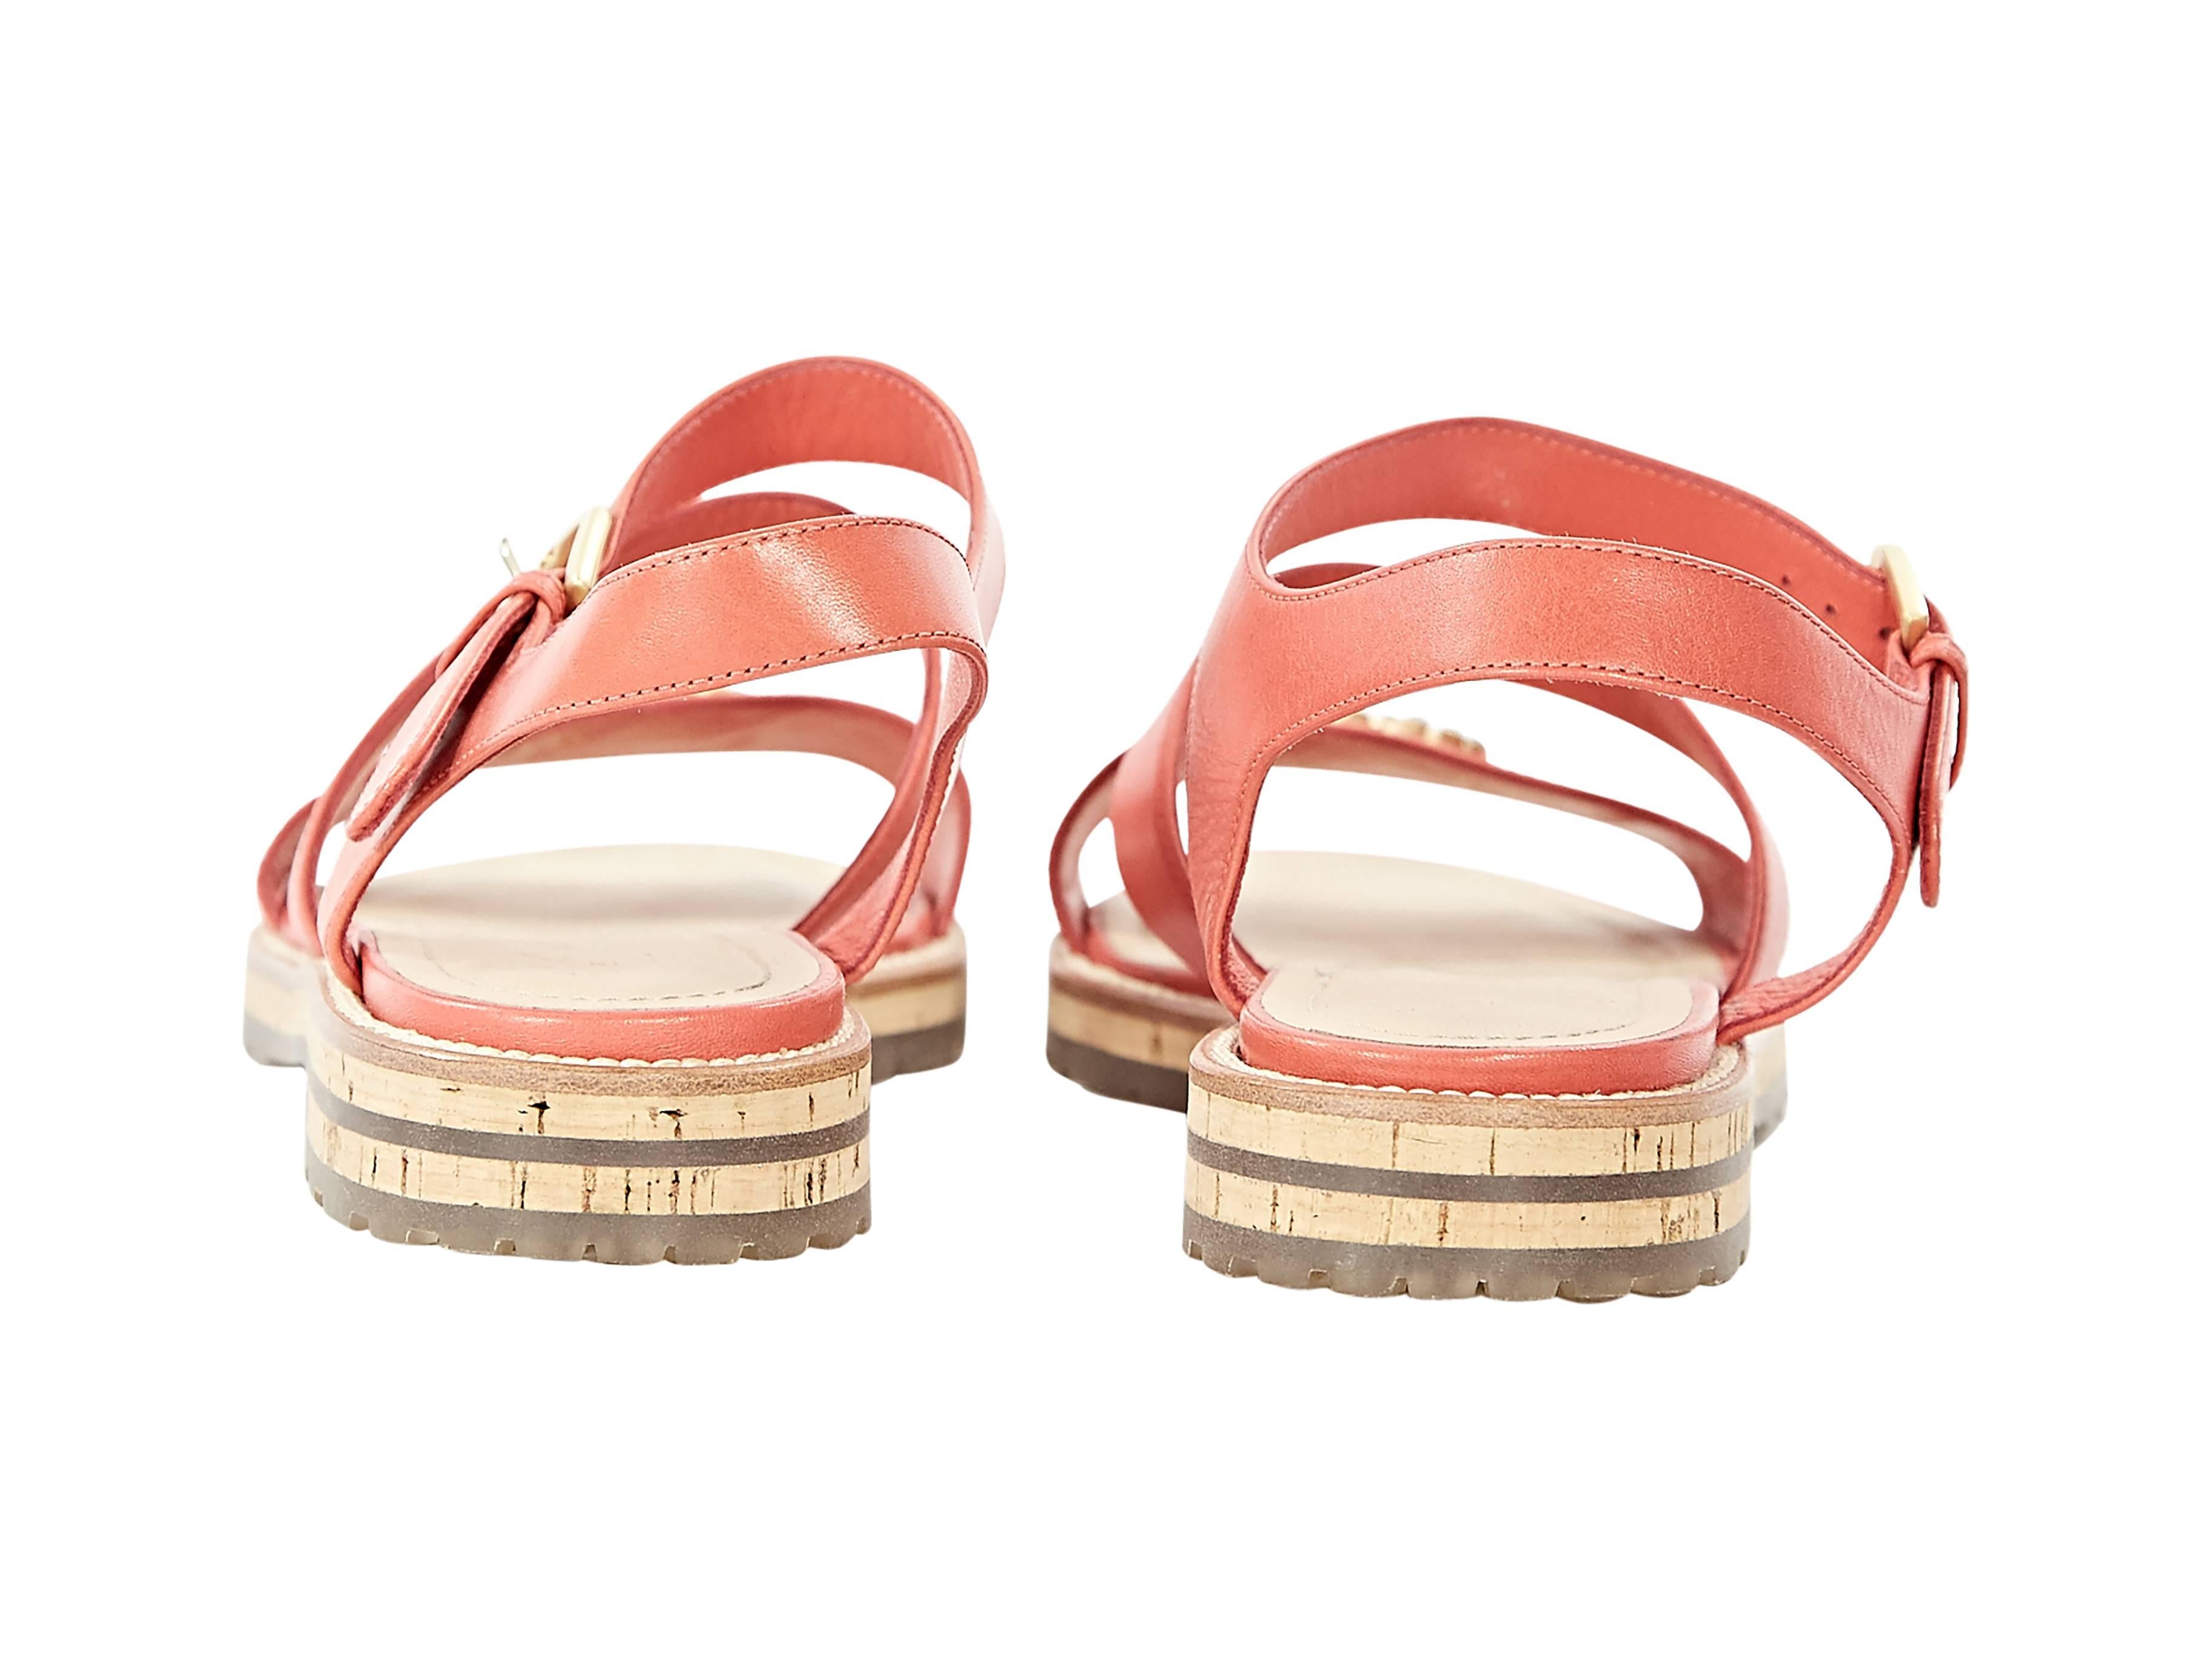 Product details:  ﻿Coral leather flat sandals by Chanel.  Adjustable ankle strap.  Open toe.   Embellished logo accents vamp strap.
Condition: Excellent.  